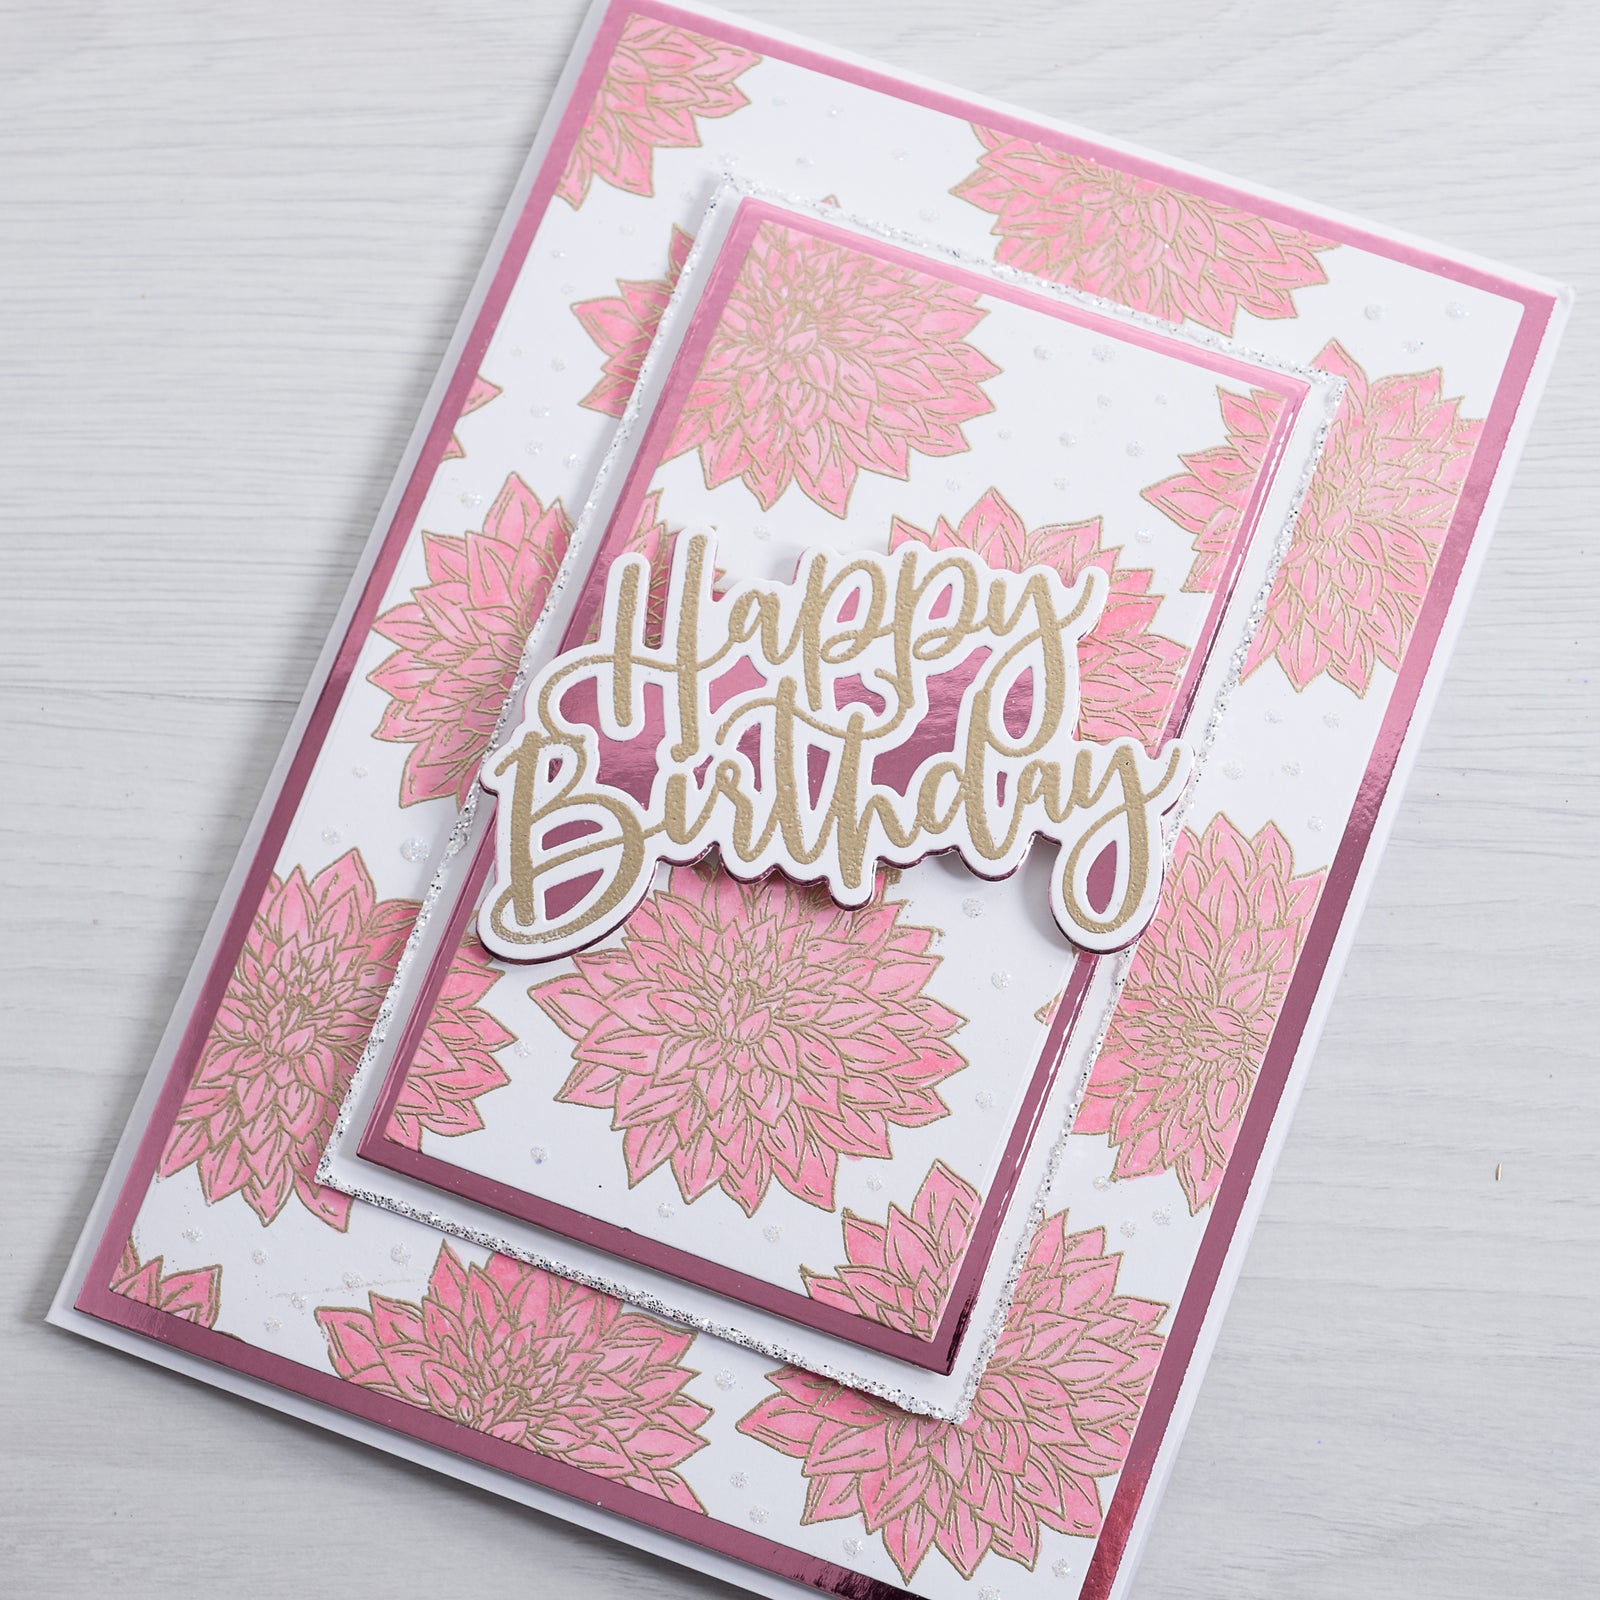 Learn how to create this beautiful pink patterned dahlia flowered Birthday Card with our quick and easy tutorial from Chloes Creative Cards.